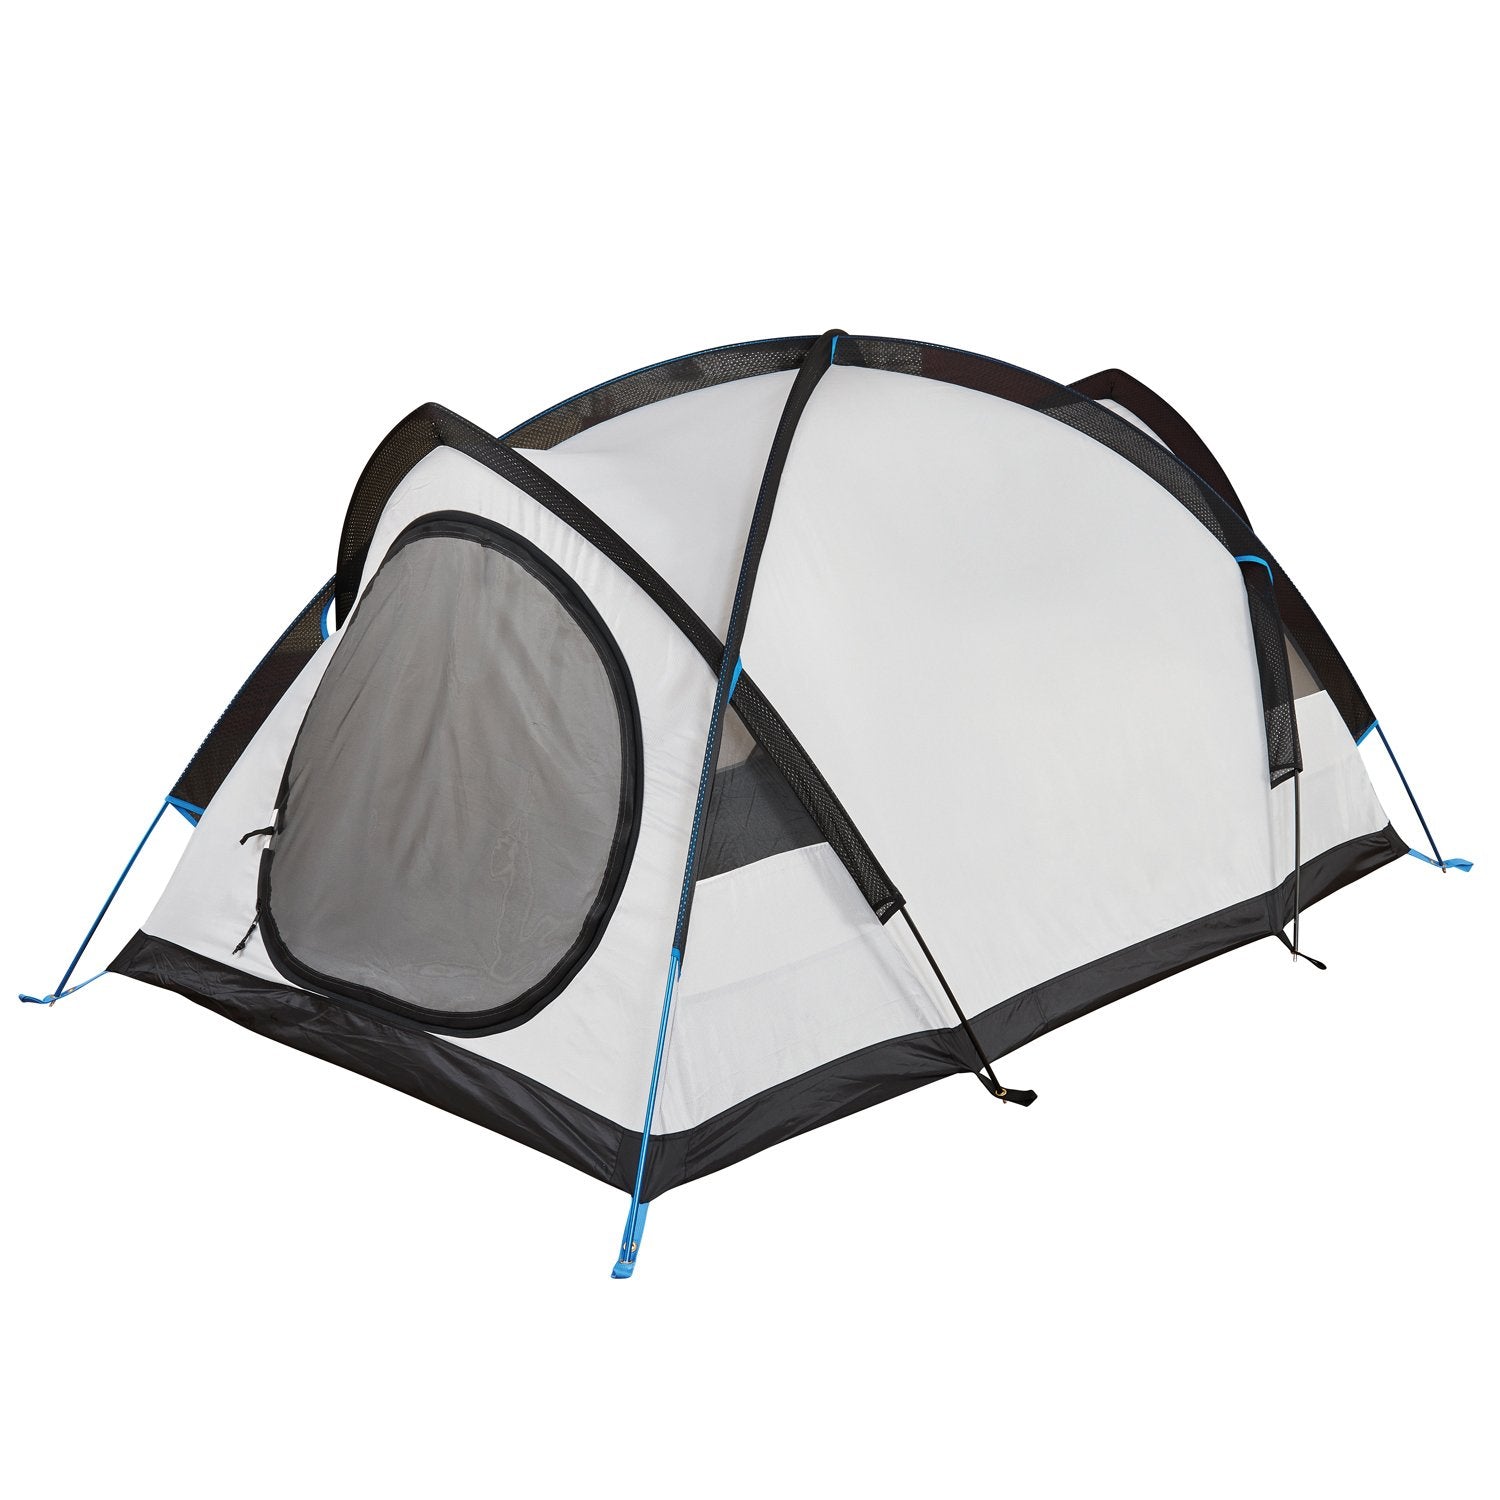 Wild Country Trisar 2D (V2) Tent - 2 Person Tent